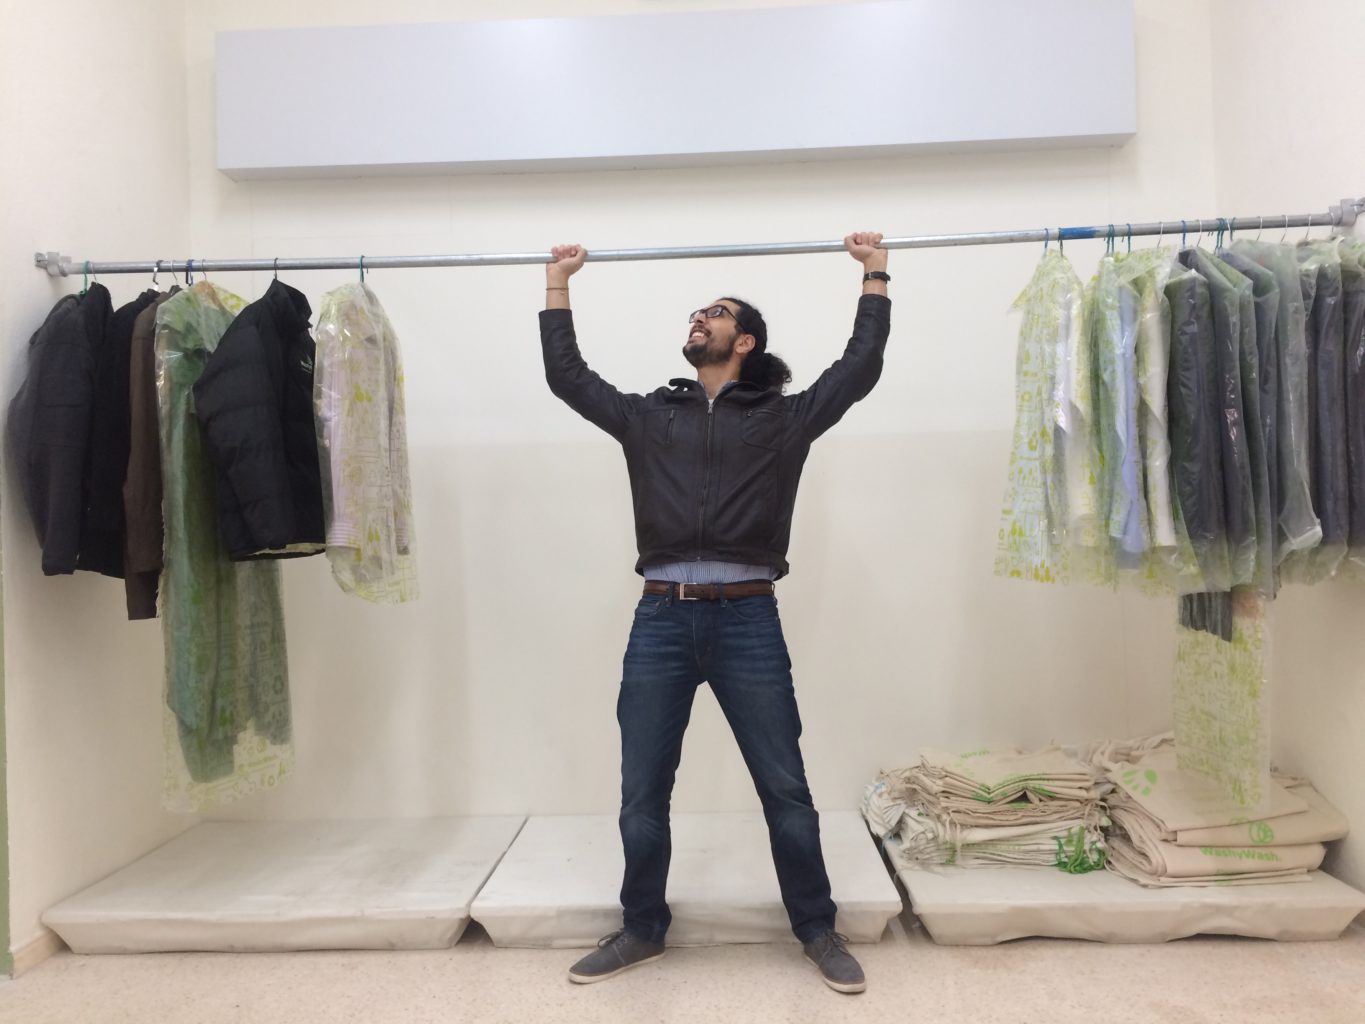 Eco-friendly laundry revolution is a detox for Jordanian dry cleaning | The Switchers